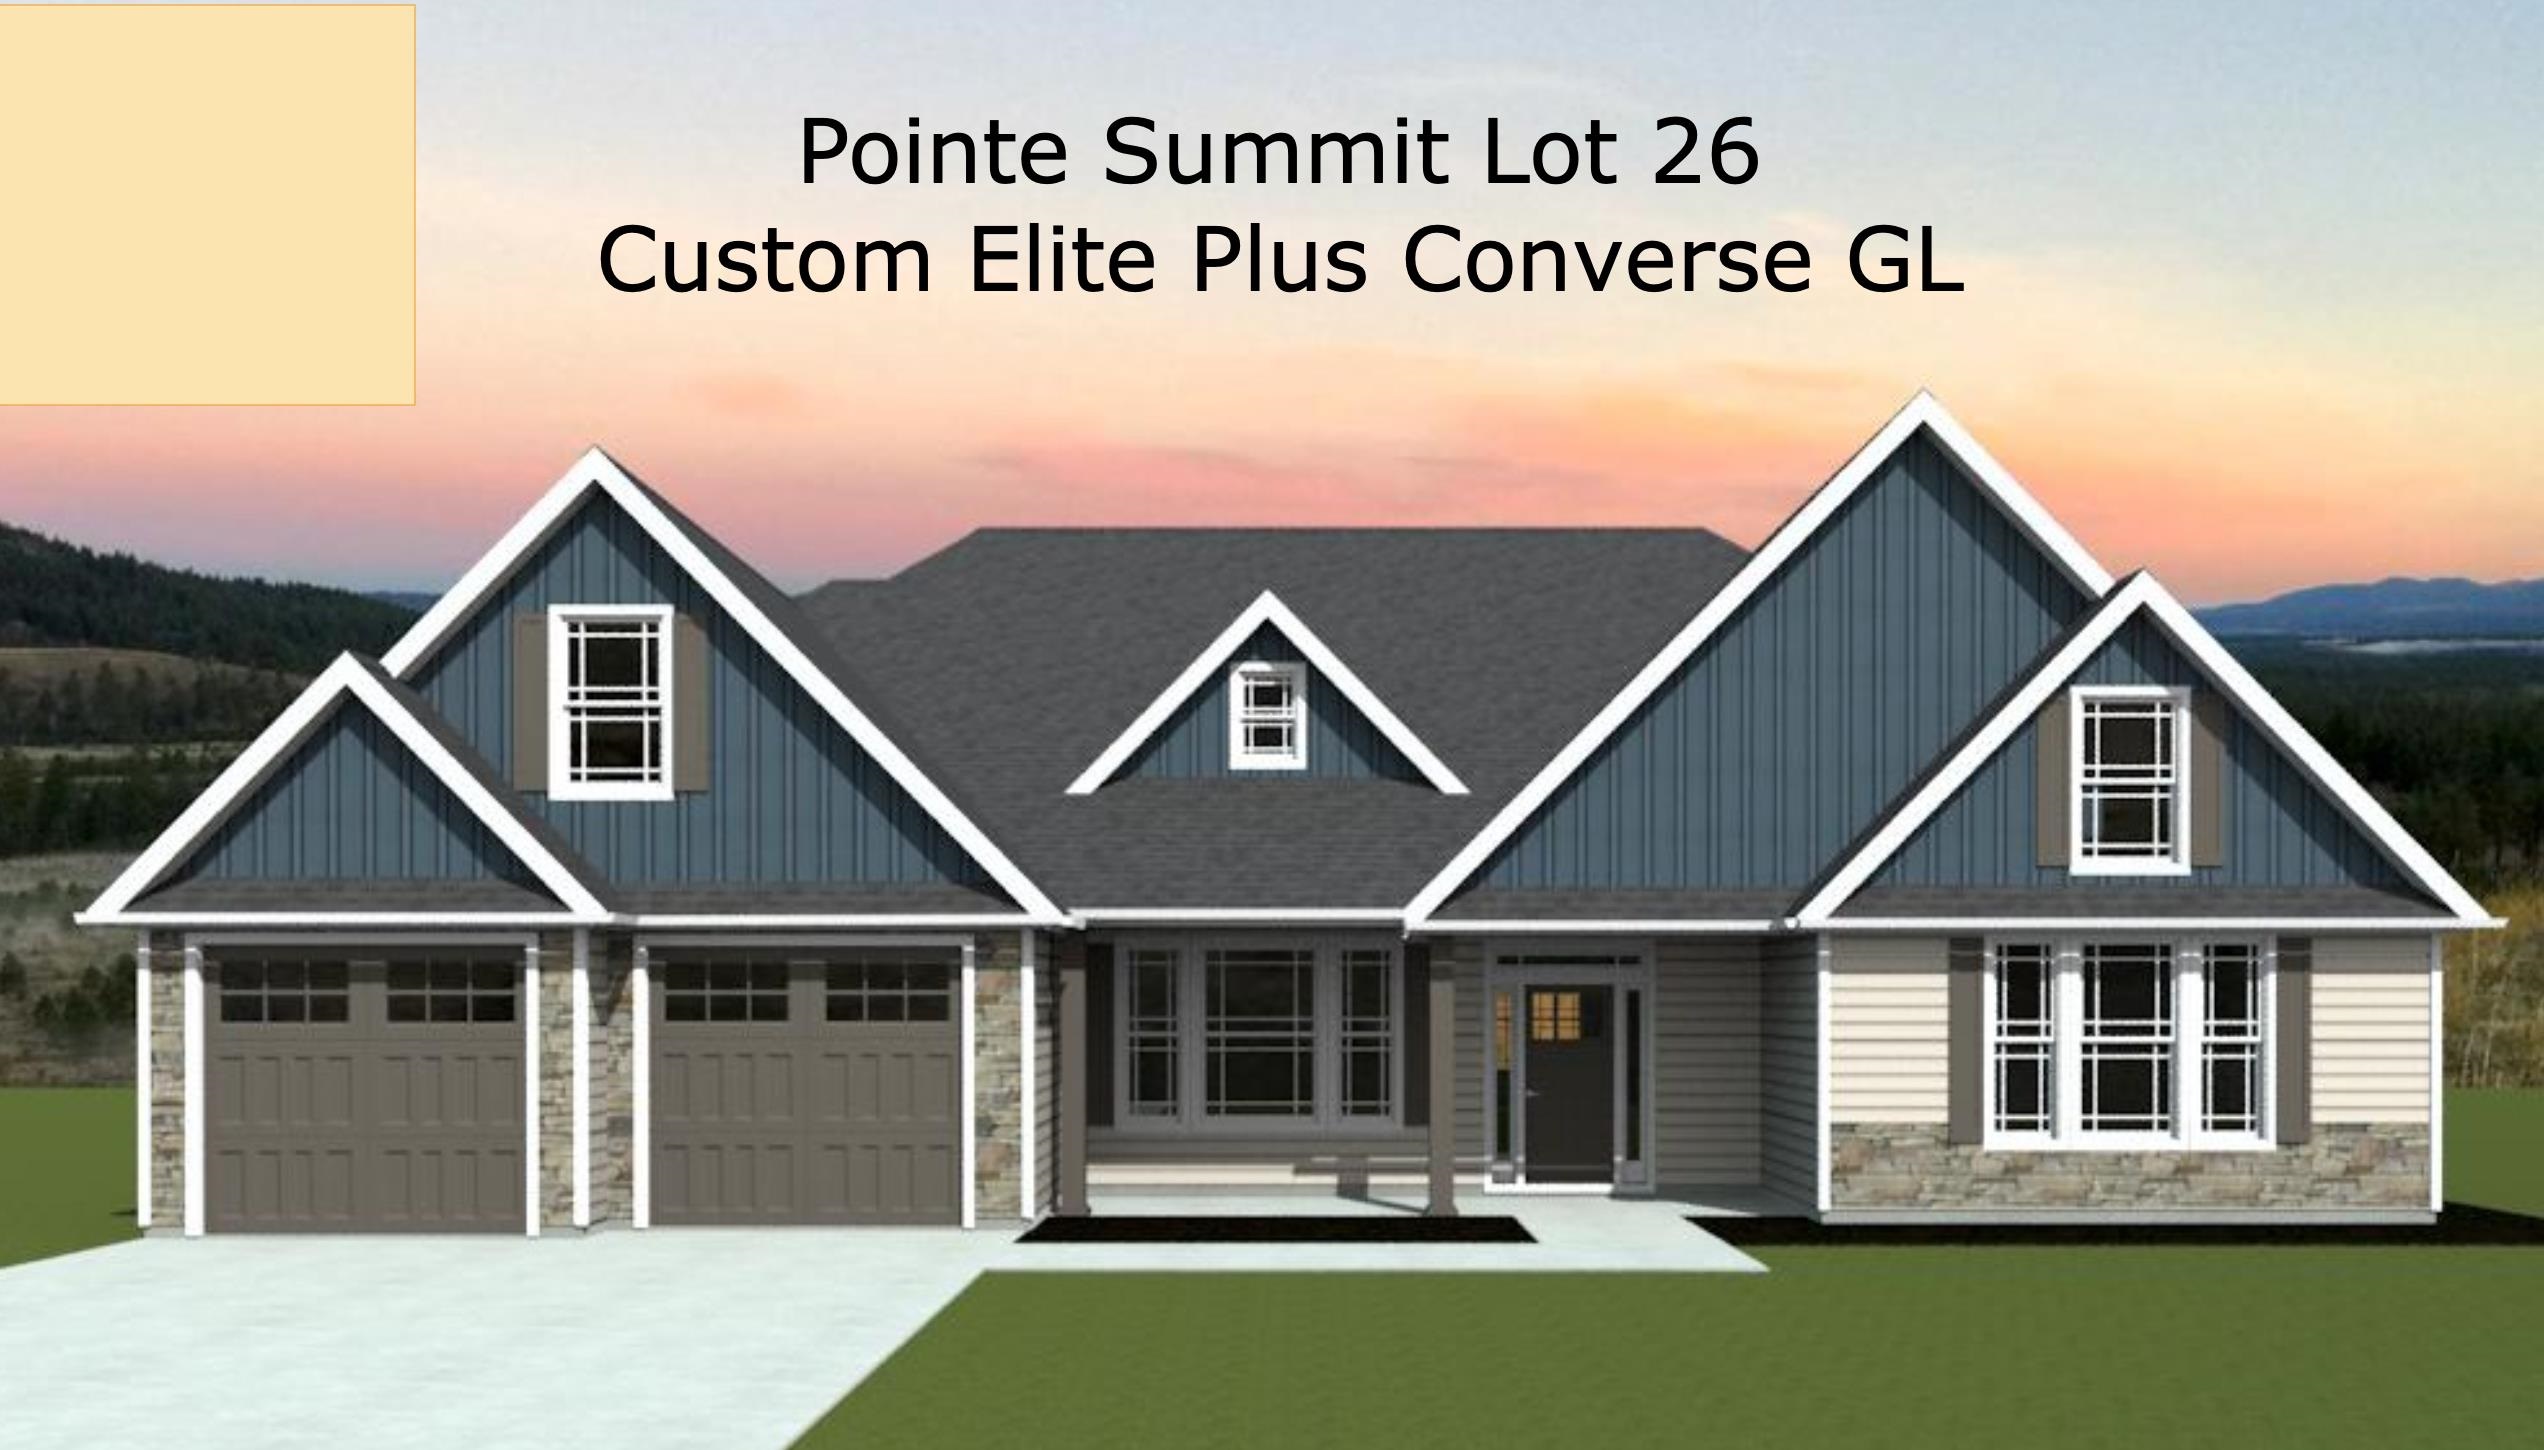 Beautiful views of the Blue Ridge mountains are calling you to Pointe Summit! A new 96-acre luxury, gated community with large Lots and spectacular mountain views! It’s an easy drive to downtown Greenville AND Hendersonville. The Converse Elite Plus floor plan is an open concept home featuring 3 bedrooms, 2.5 bathrooms, walk-in pantry, and large kitchen with extended cabinets & island. Standard features in this home and in the community include concrete plank and stone exterior, architectural shingles, soffit exterior lighting, nine to 11 foot ceilings, crown molding with rope lighting in the master and living room, large tiled shower in the master bathroom, 80 gallon water heater, large covered back deck and more! Make one of many homes available in this community yours! Lot 26